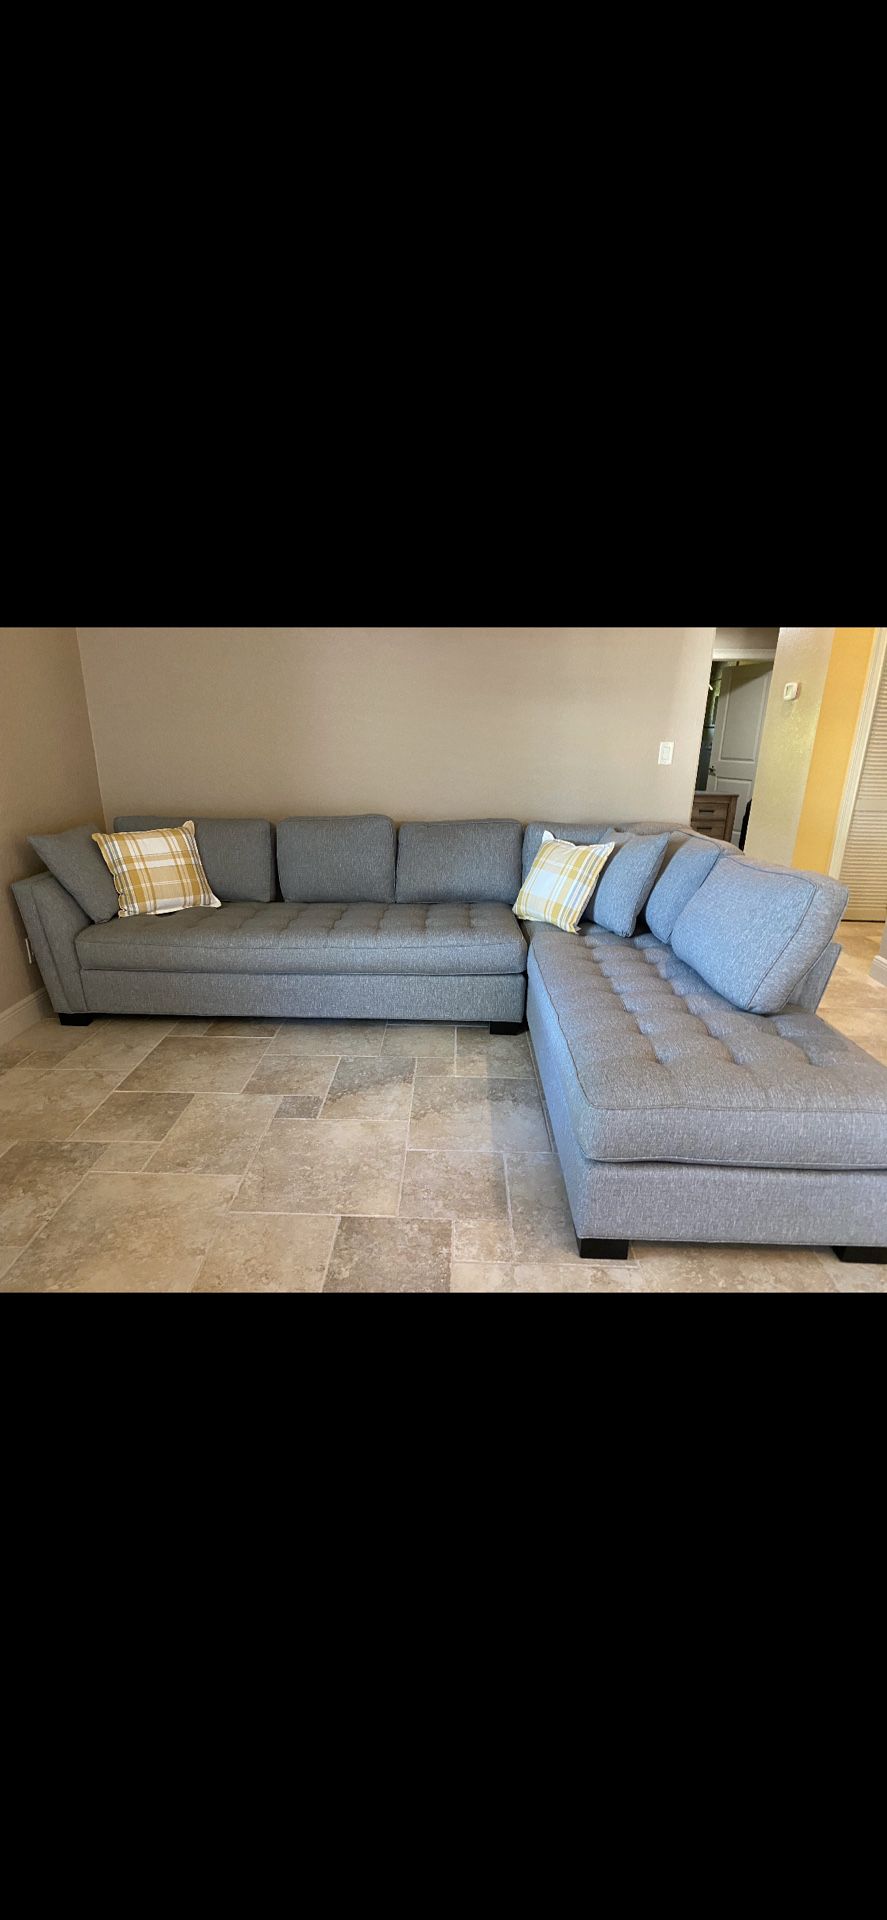 New Cindy Crawford 2 Piece XL Sectional Couch - Bluestone textured